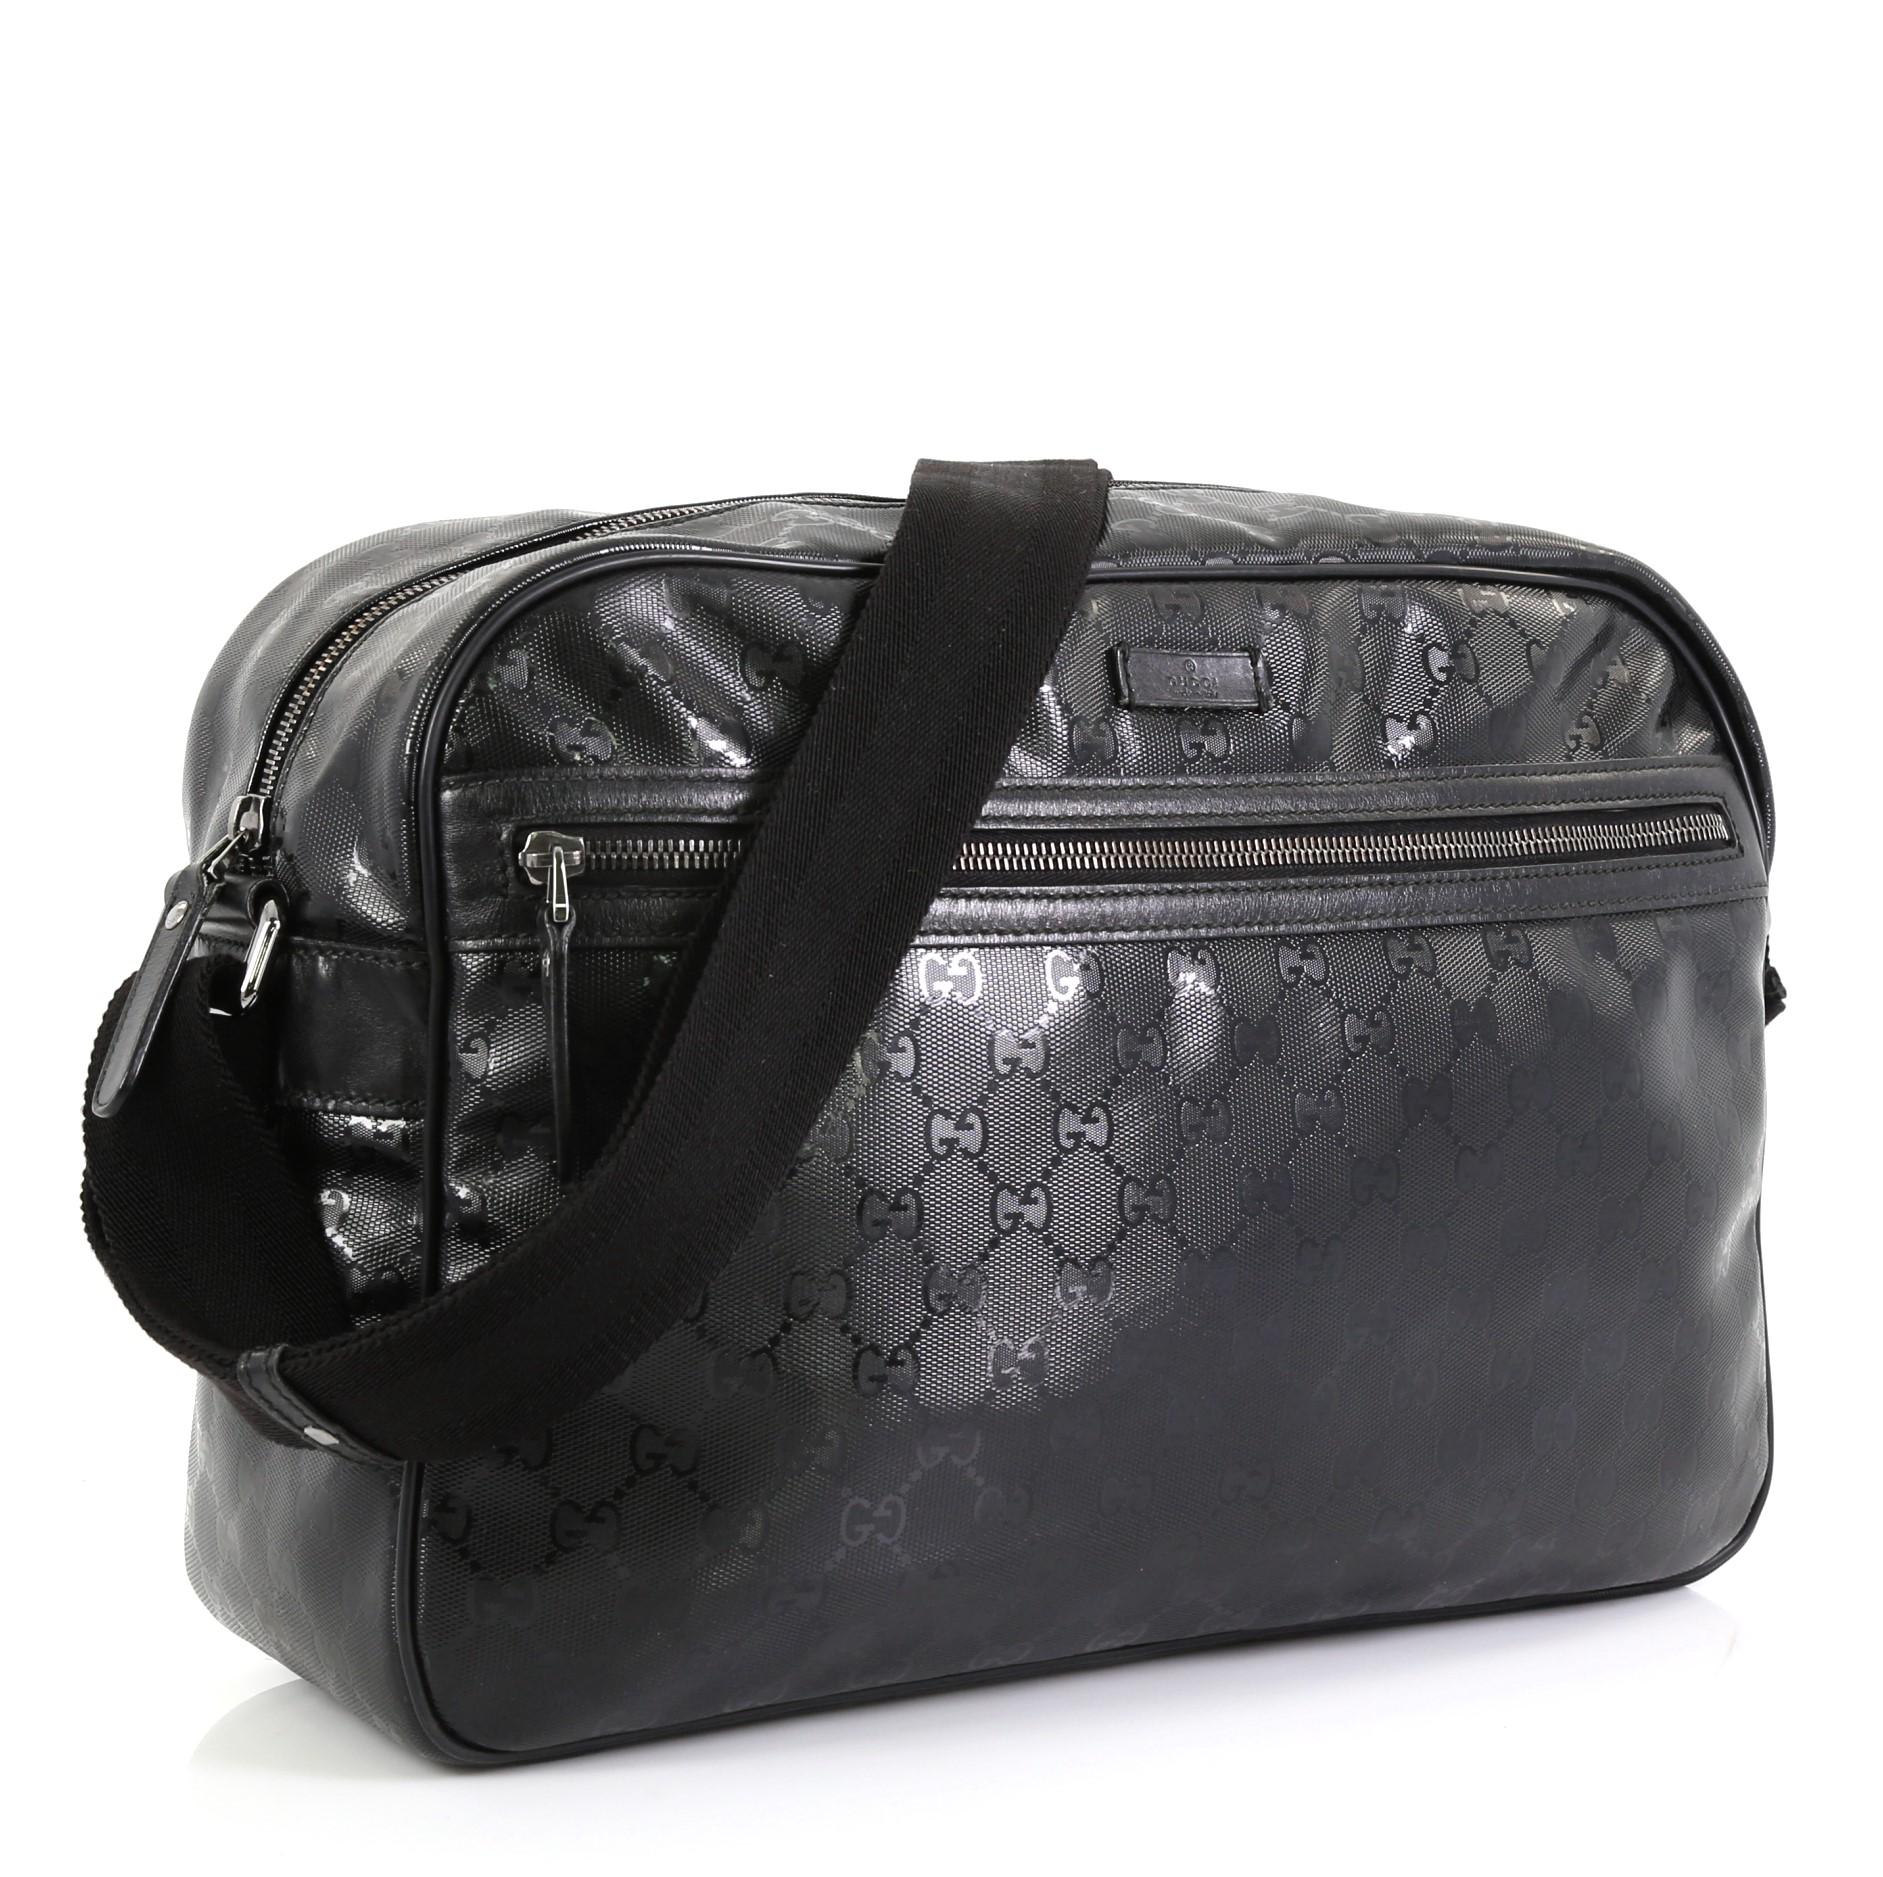 This Gucci Front Zip Camera Bag GG Coated Canvas Large, crafted in black GG coated canvas, features adjustable canvas strap, black leather trims, exterior front zip pocket and silver-tone hardware. Its zip closure opens to a black fabric interior